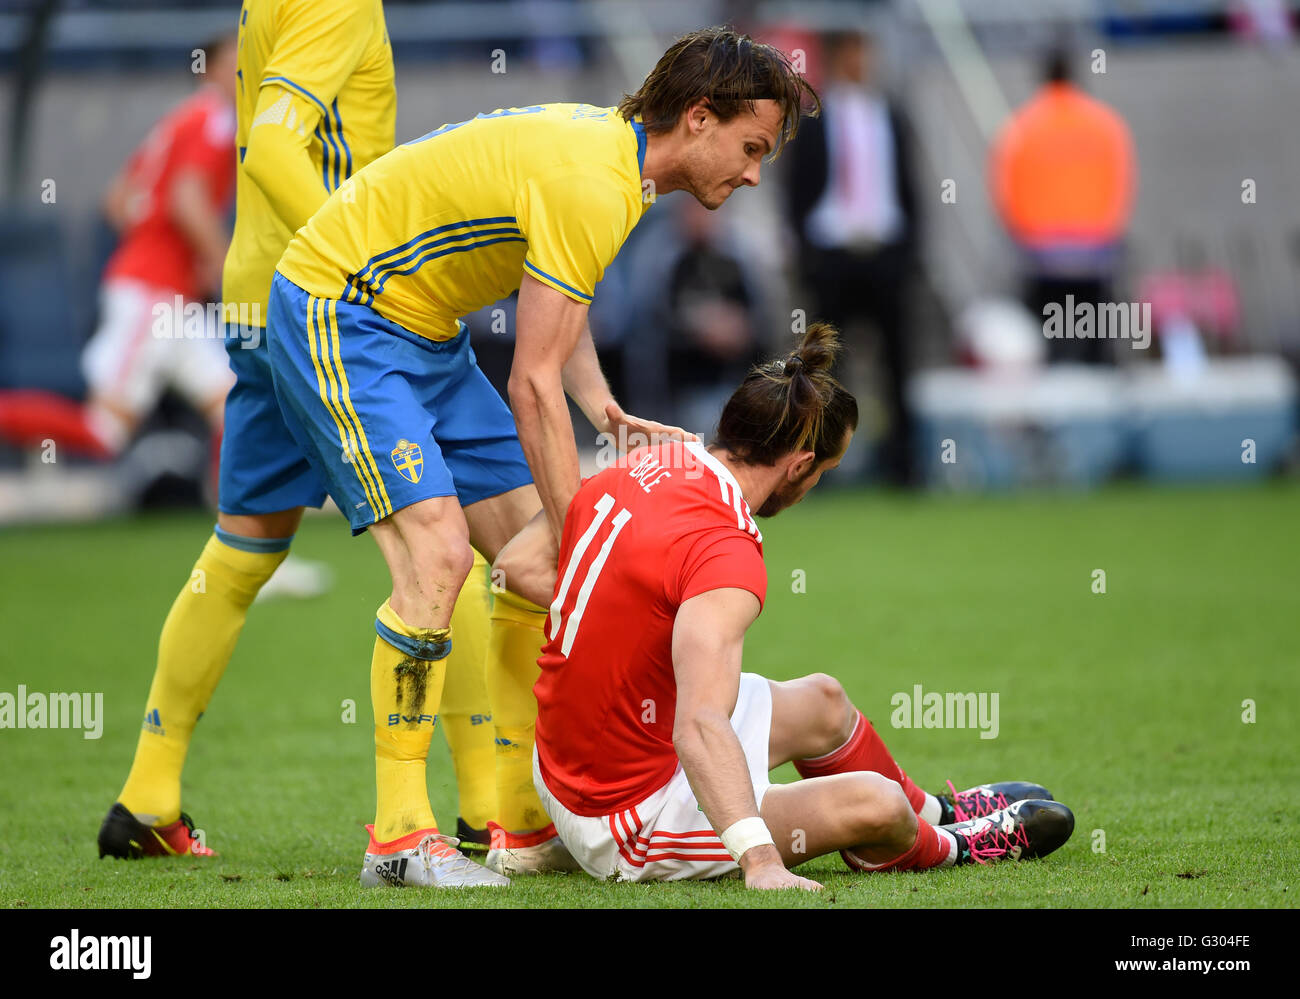 Sweden's Albin Ekdal (left) helps up Wales' Gareth Bale after a collision  during the International Friendly match at the Friends Arena, Stockholm  Stock Photo - Alamy